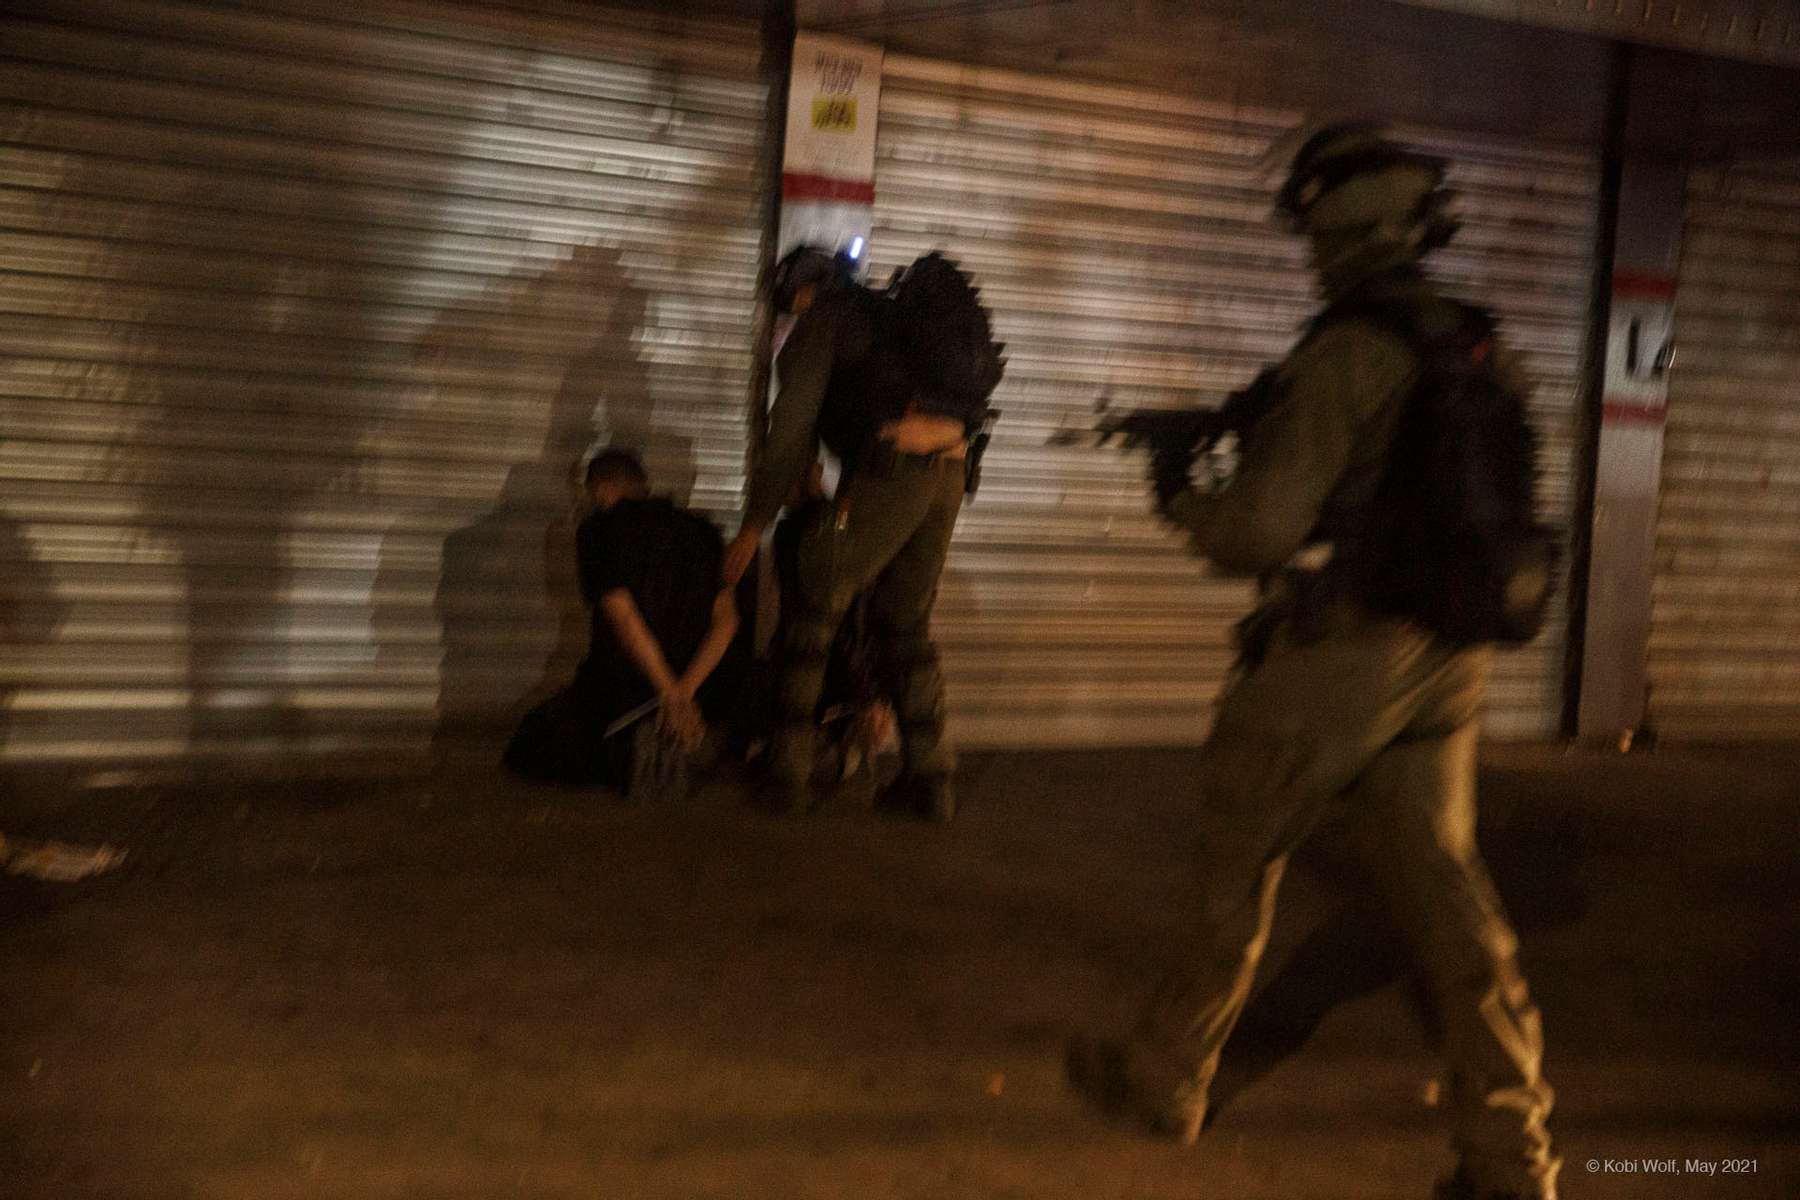 Israel police forces arrest Israel Arab from Lod during a riot in the Lod,central Israel, Thursday, May 13, 2021 